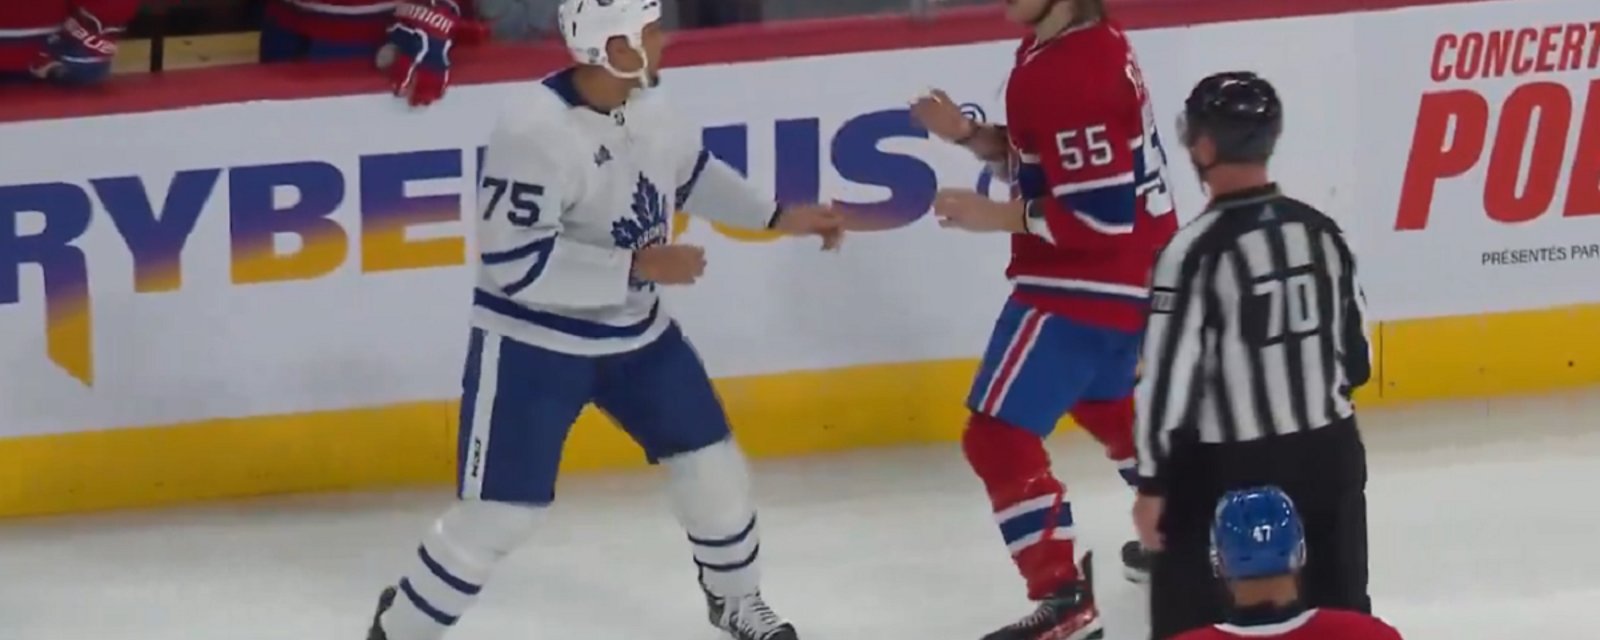 Ryan Reaves pummels Michael Pezzetta and taunts the Habs.